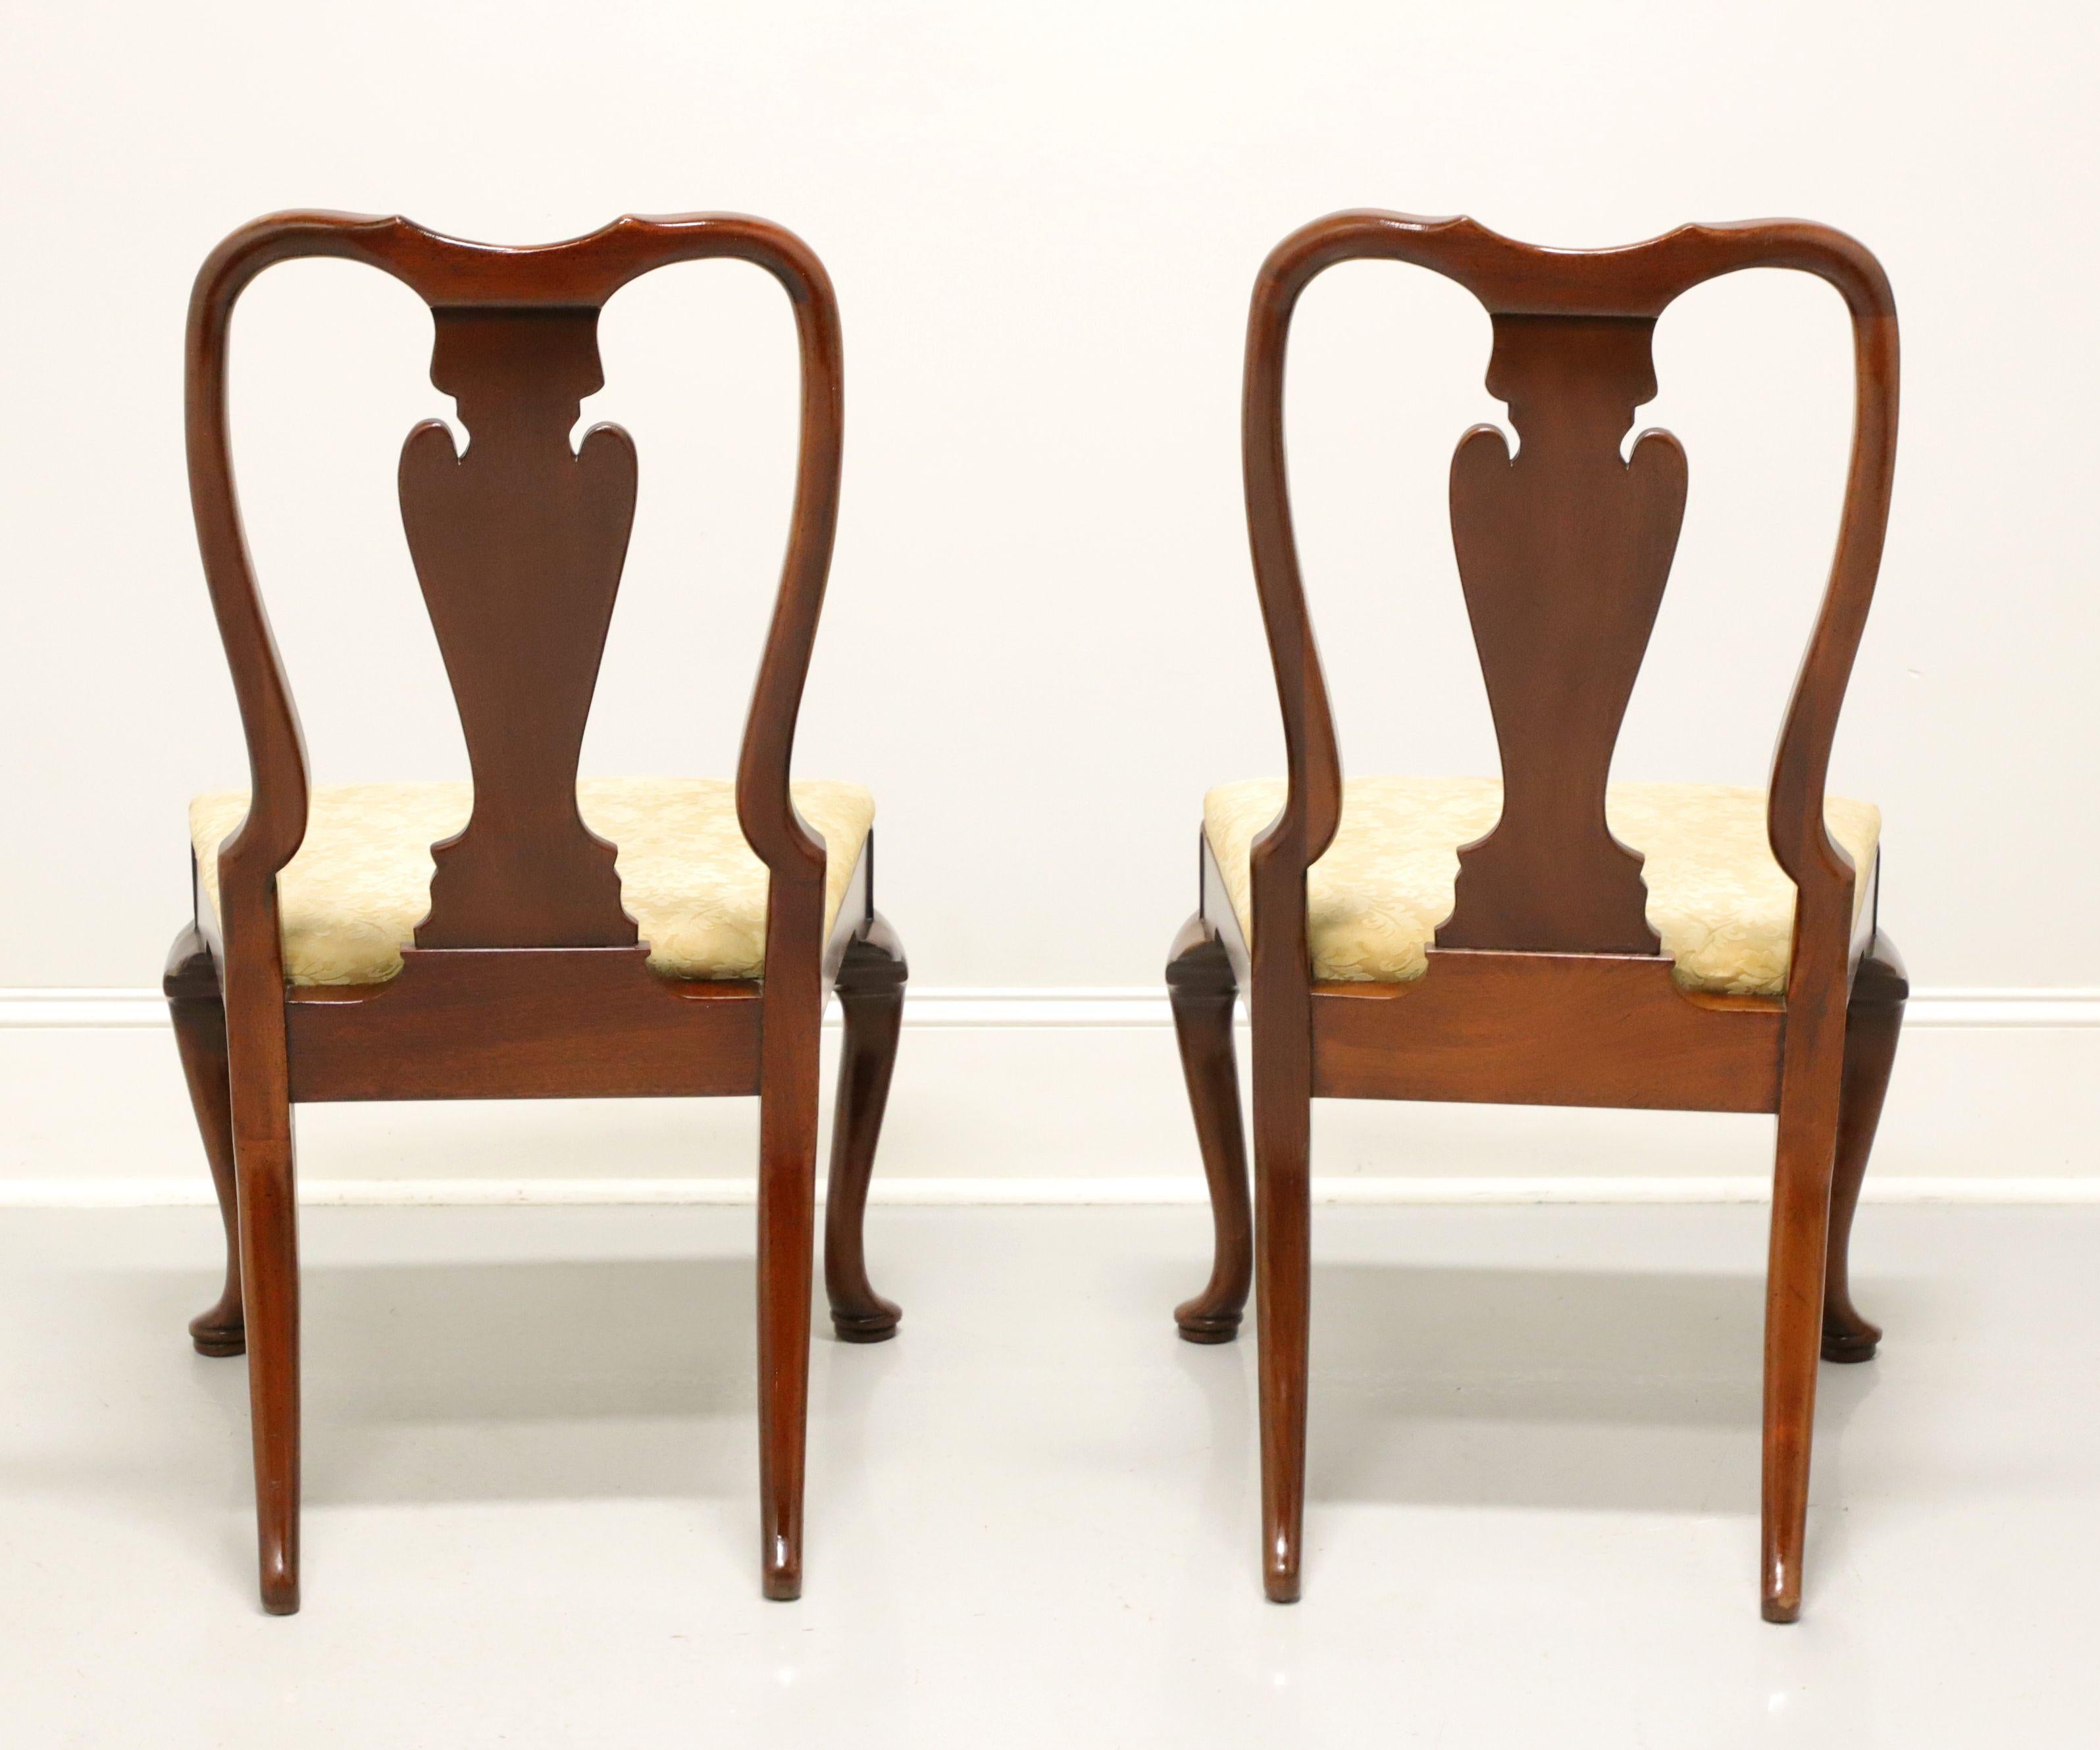 20th Century HICKORY CHAIR Amber Mahogany Queen Anne Dining Side Chairs - Pair C